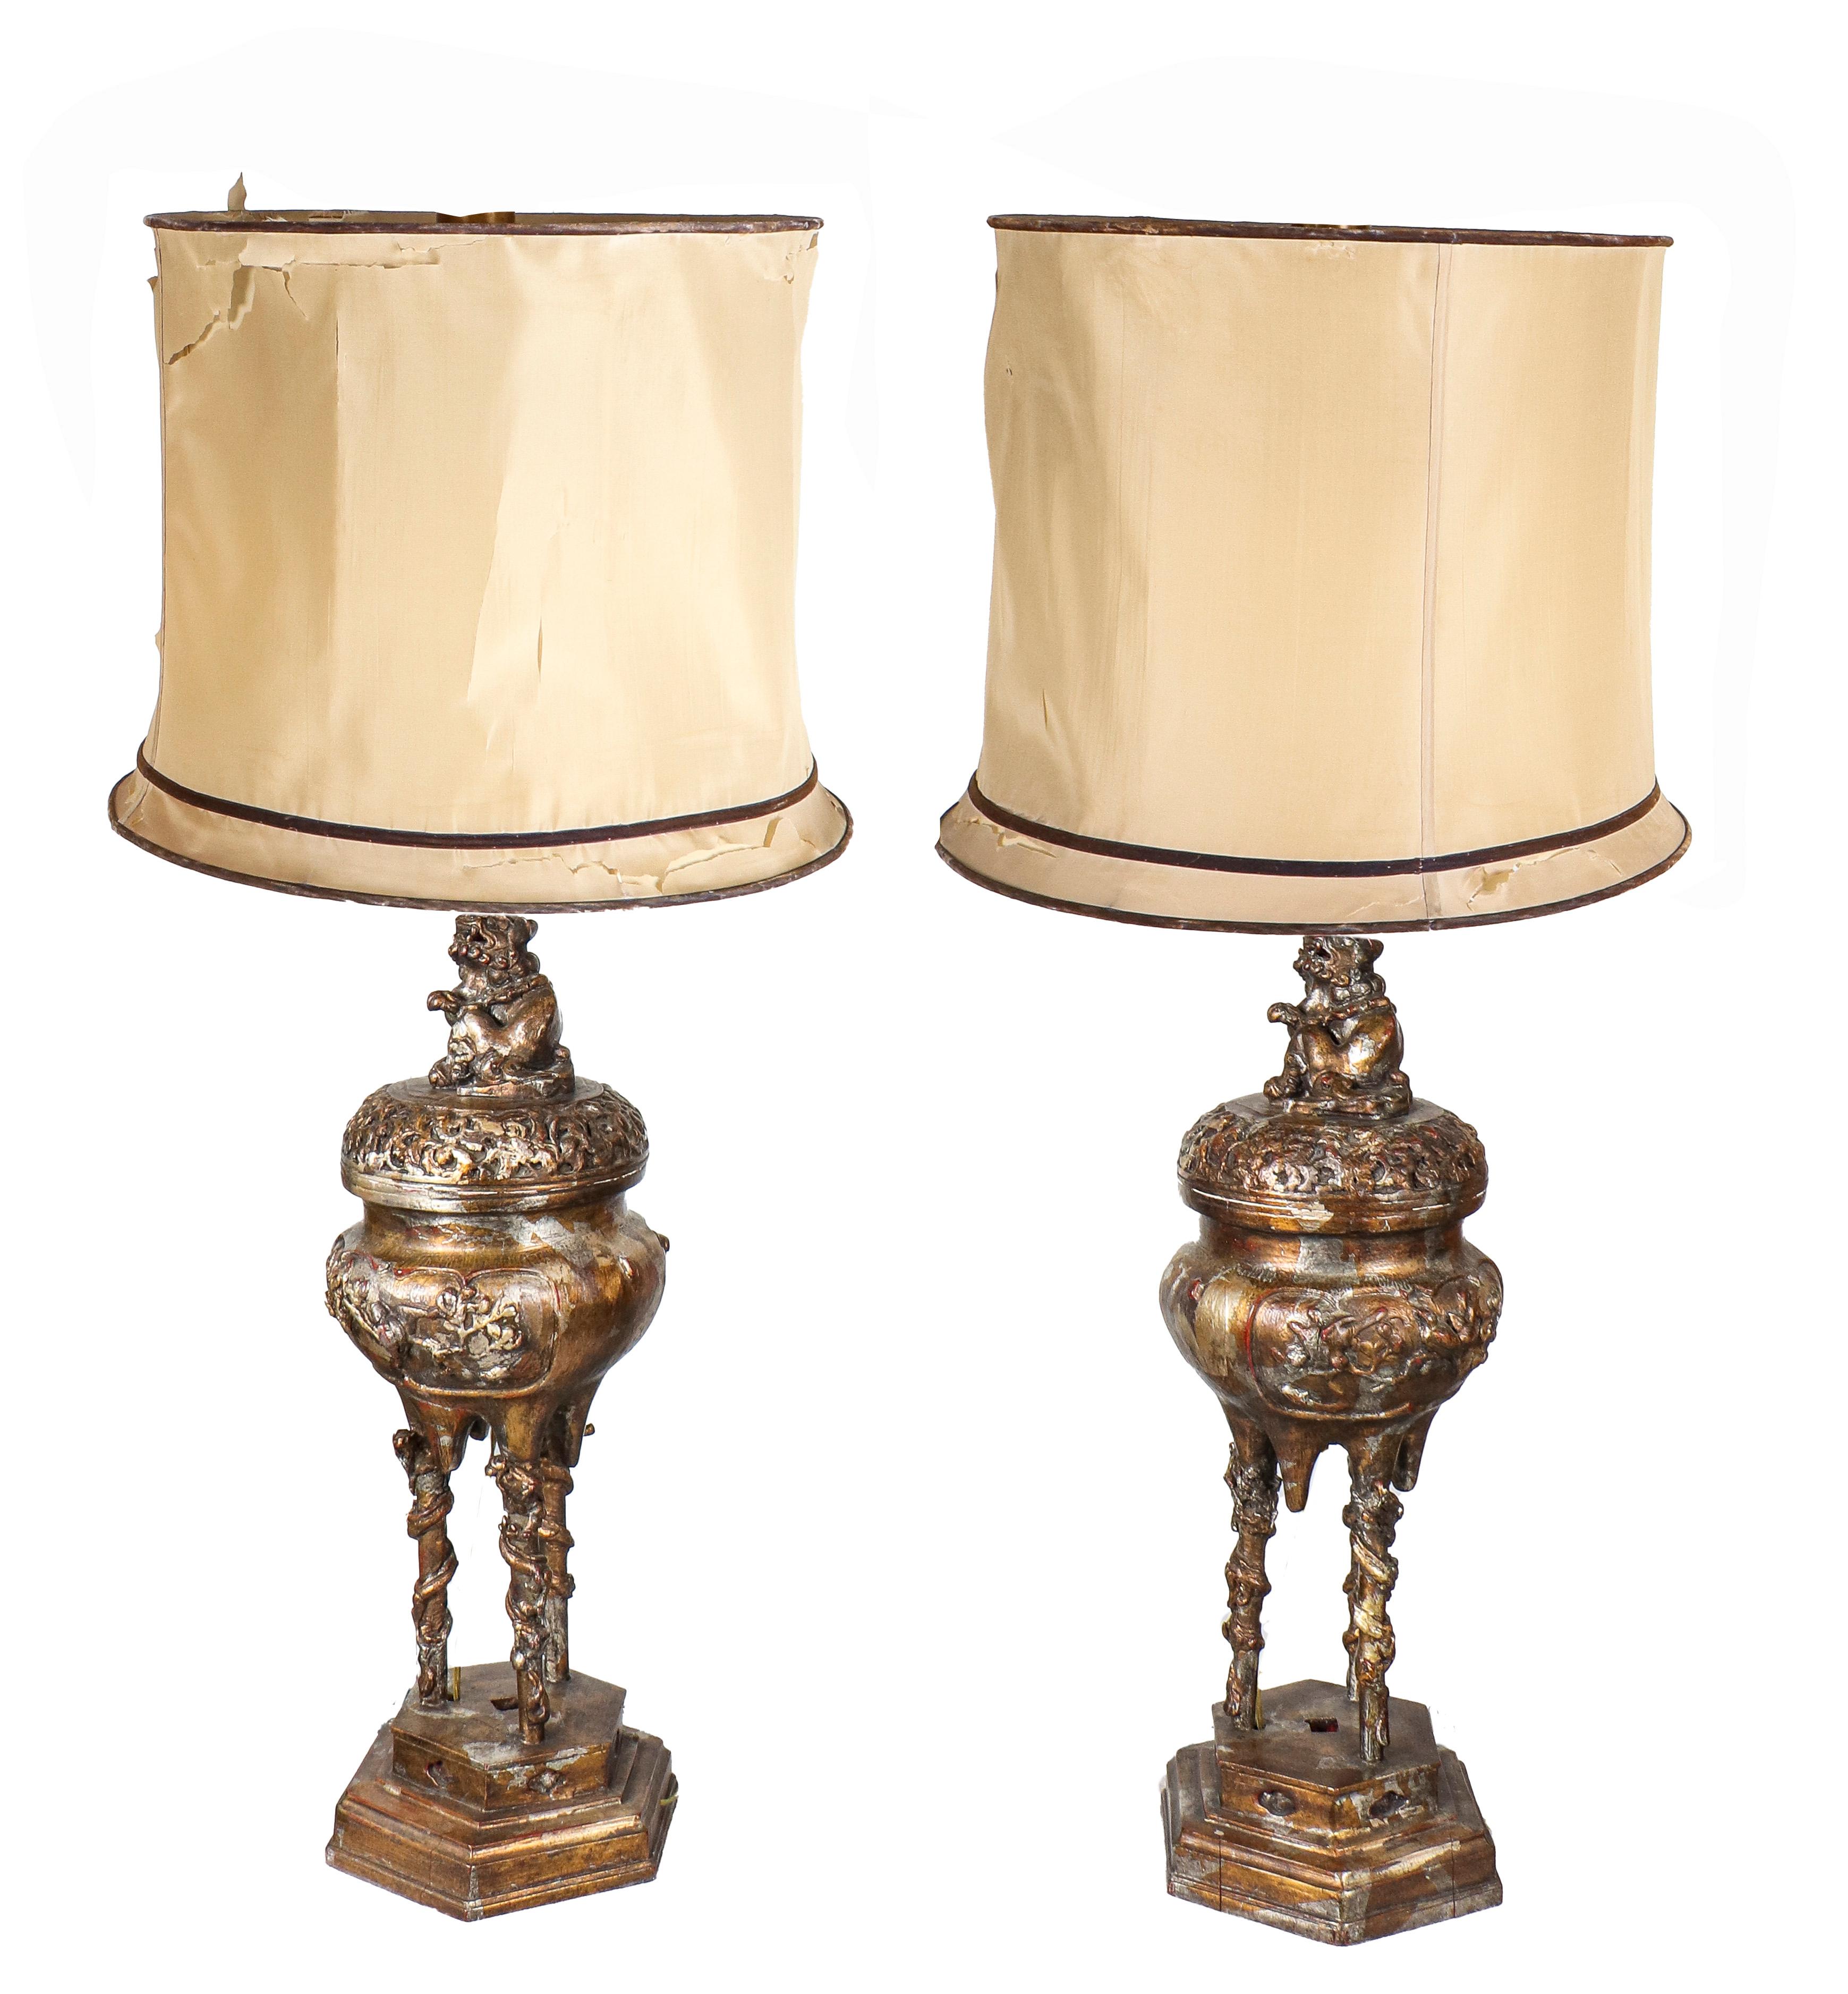 James Mont Asian Mid-Century Modern pair of molded composition table lamps, parcel gilt and parcel silvered, in Chinese Modern taste, designed circa 1960, with original silk peplum shades. Measures: 33